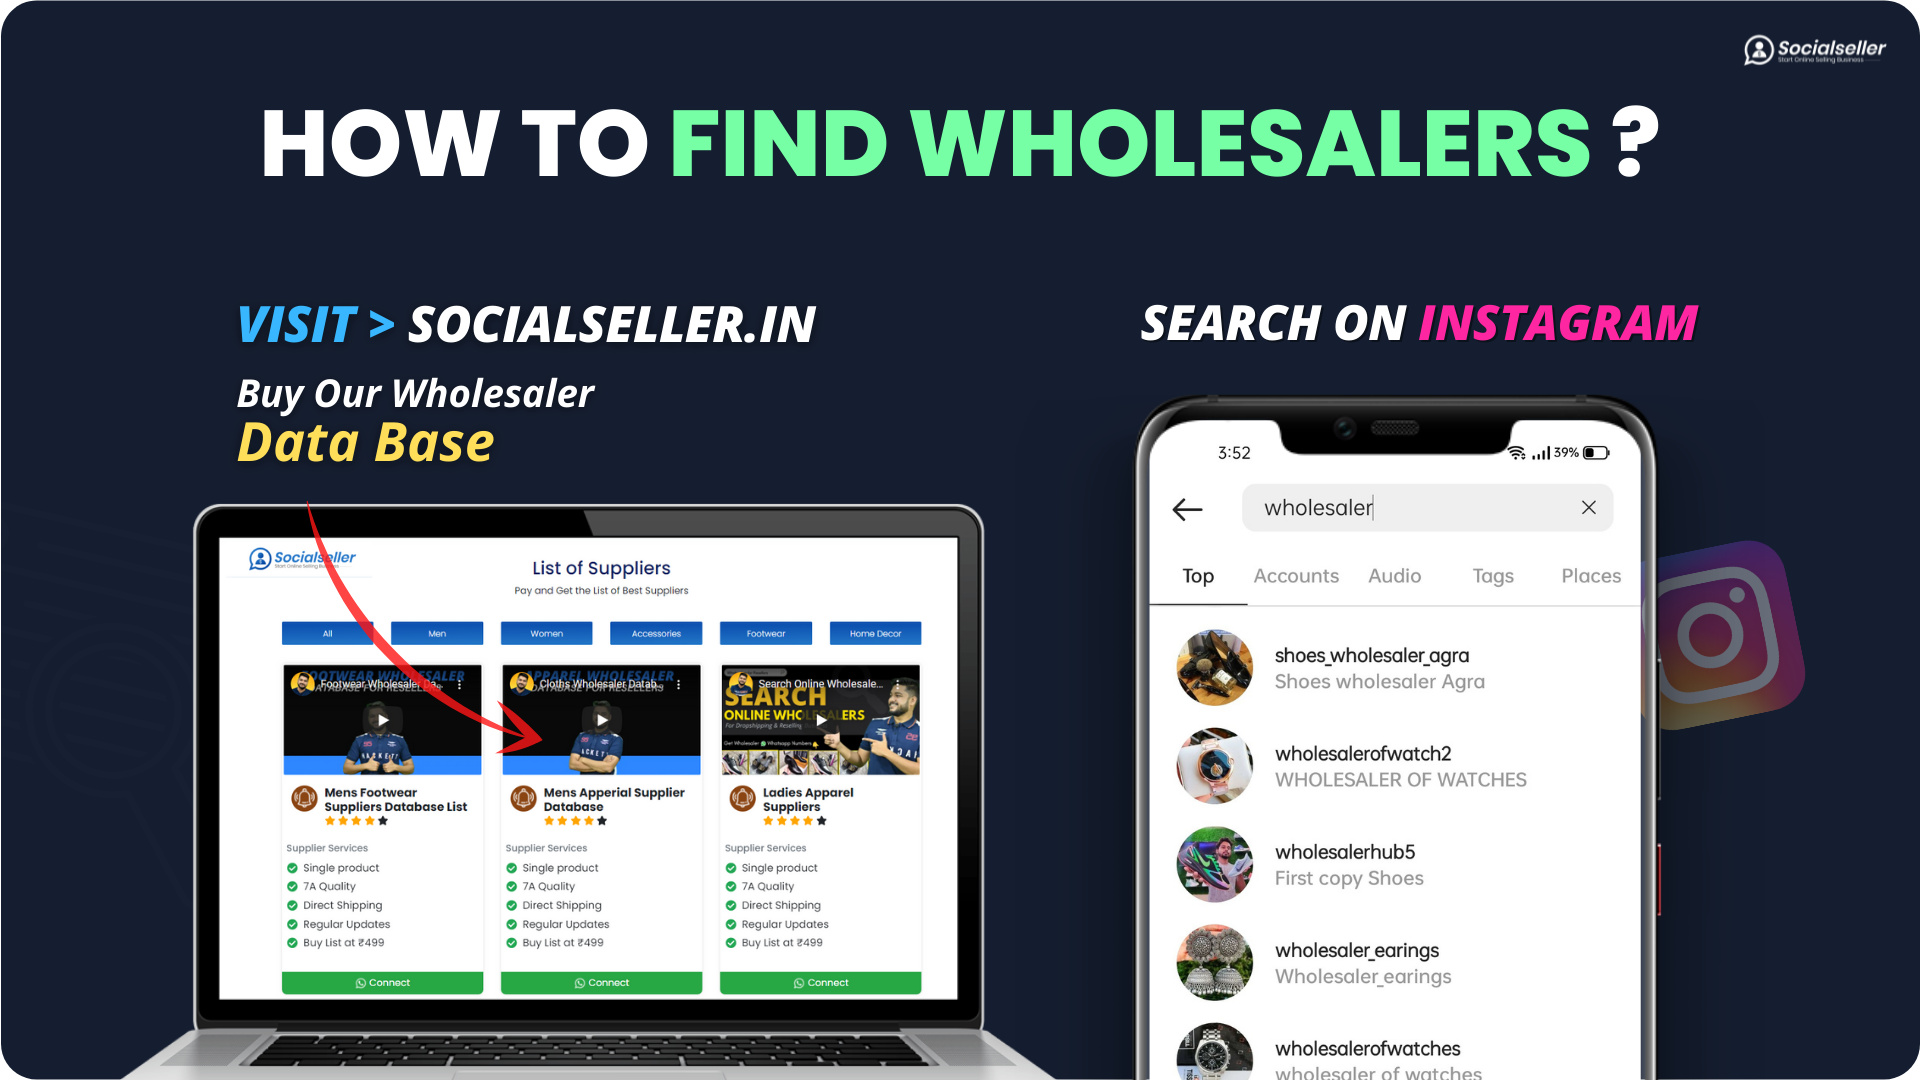 How to Find Wholesalers